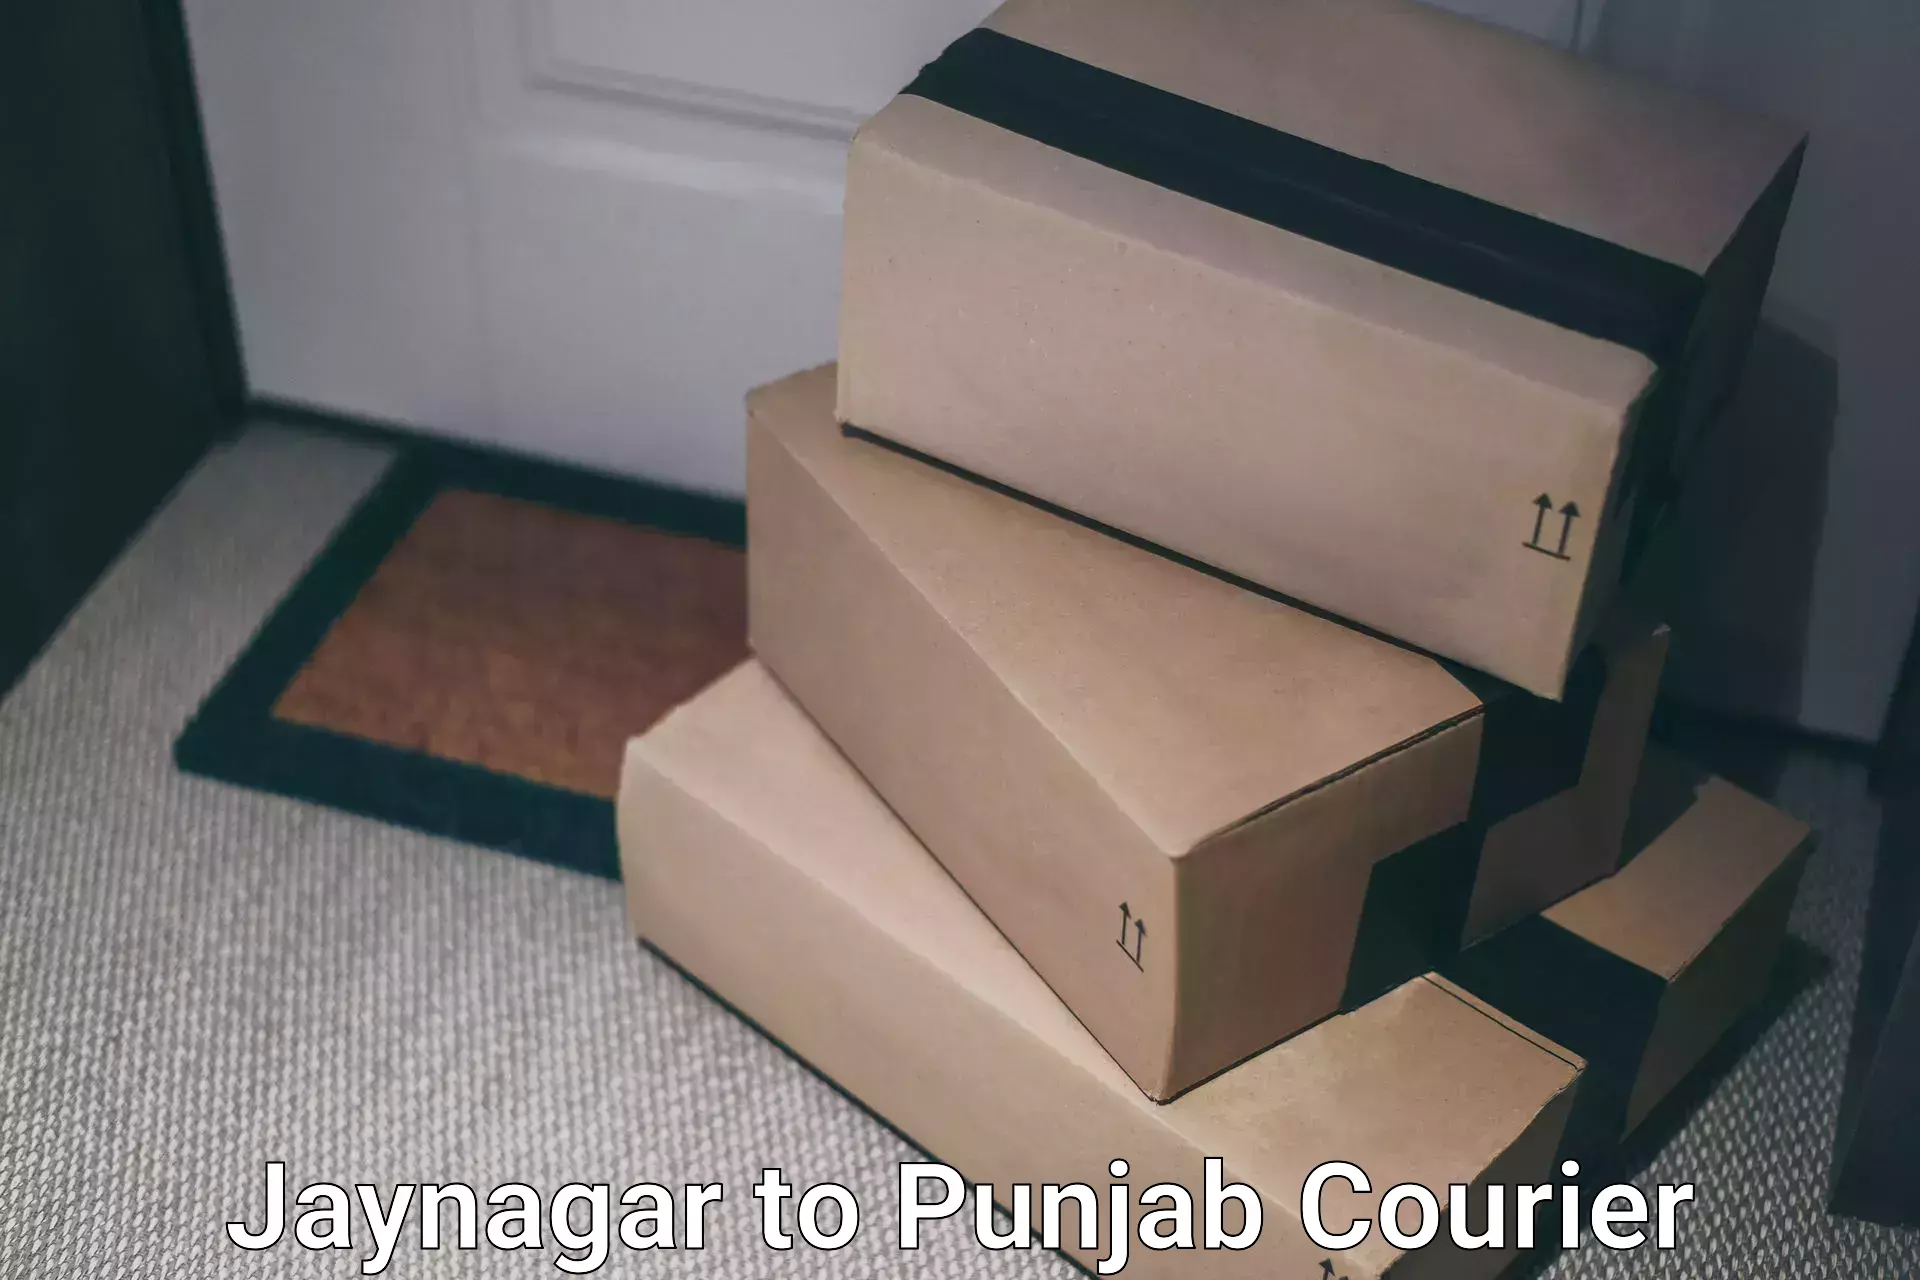 High-priority parcel service Jaynagar to Mohali